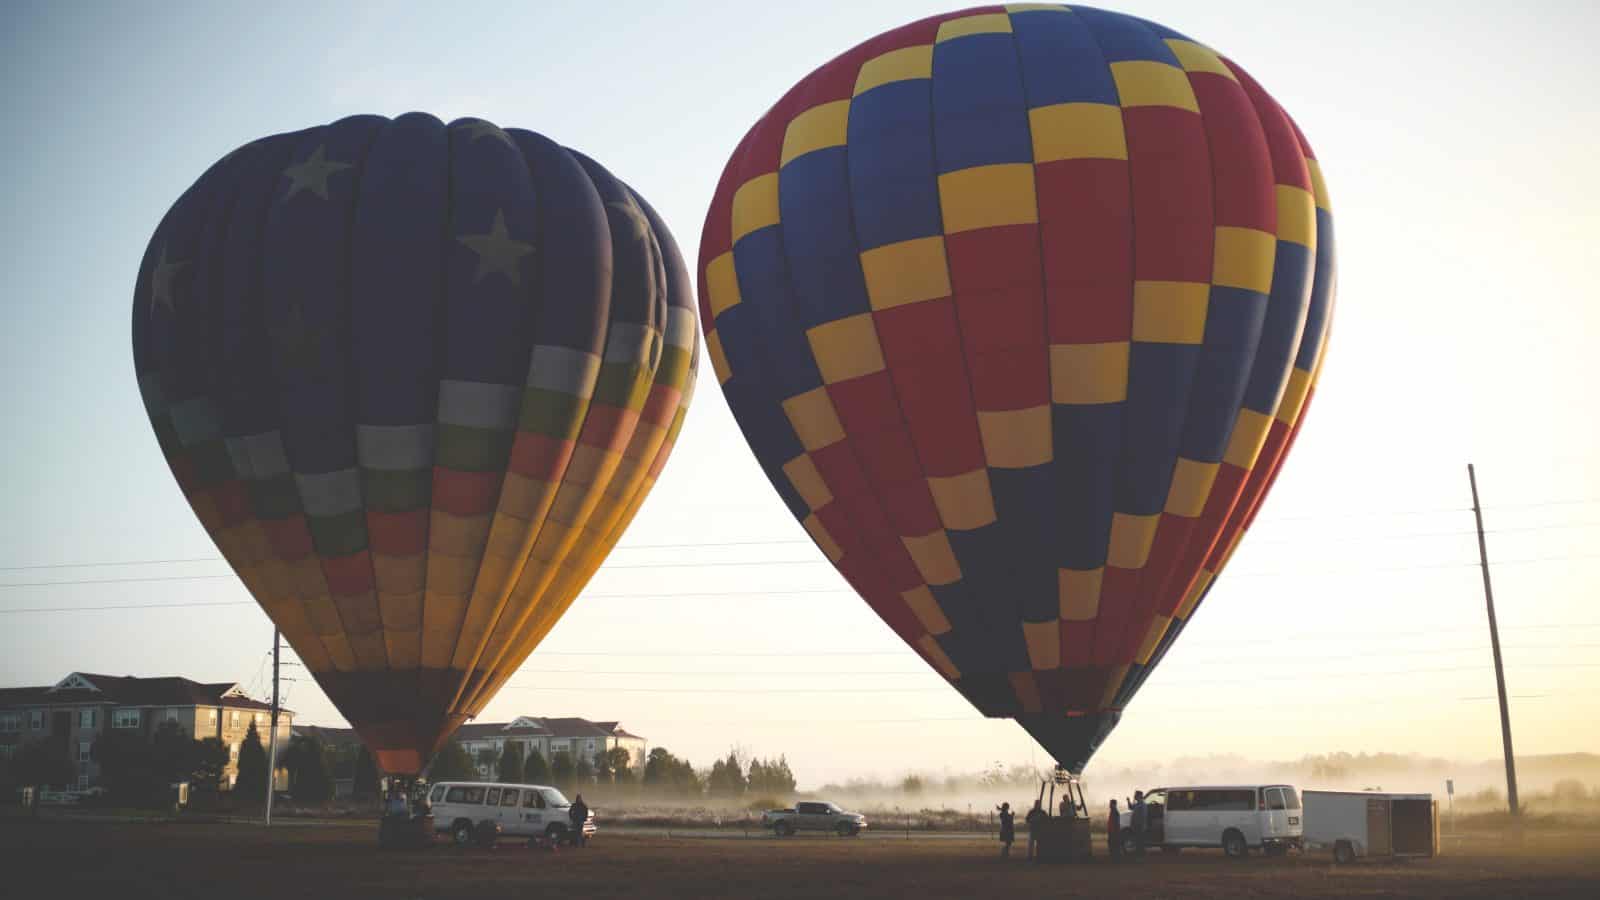 Two air balloons await passengers in the early morning at Thompson Aire, one of the best things to do in Kissimmee.